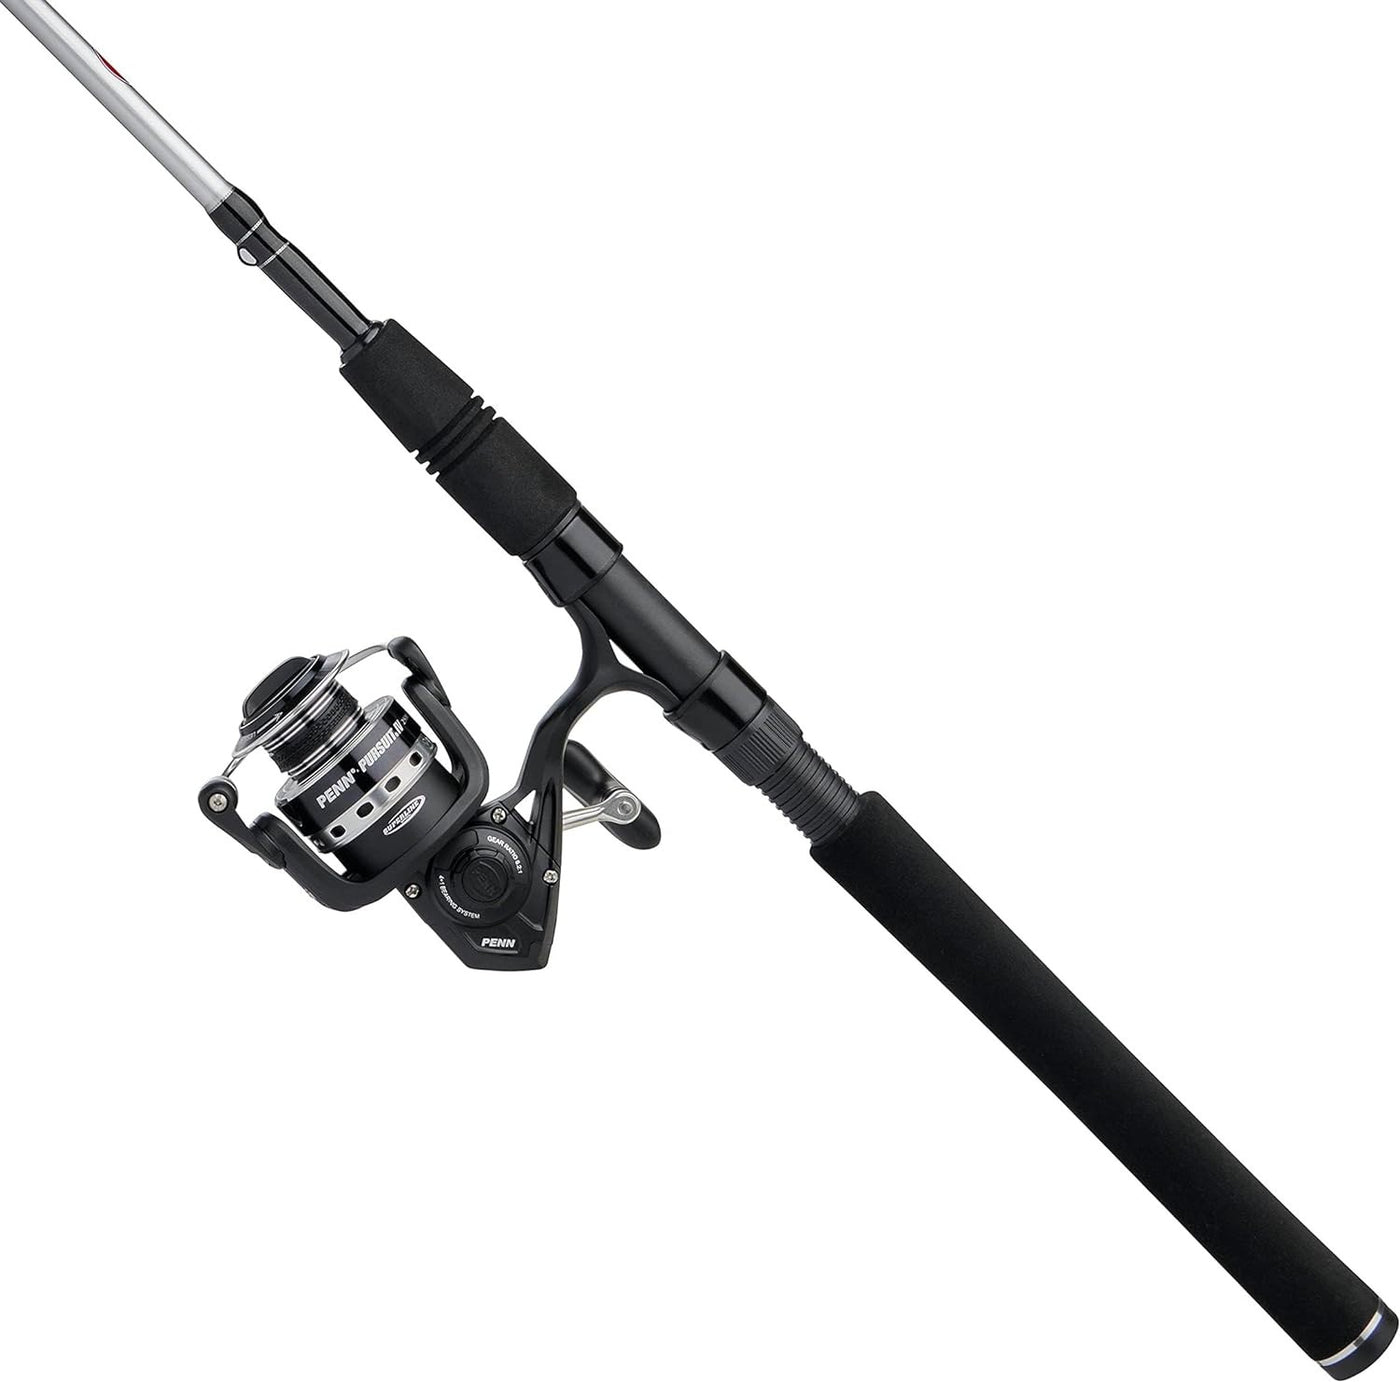 Close-up of the PENN Pursuit IV spinning reel attached to the fishing rod, highlighting the reel's details and finish.